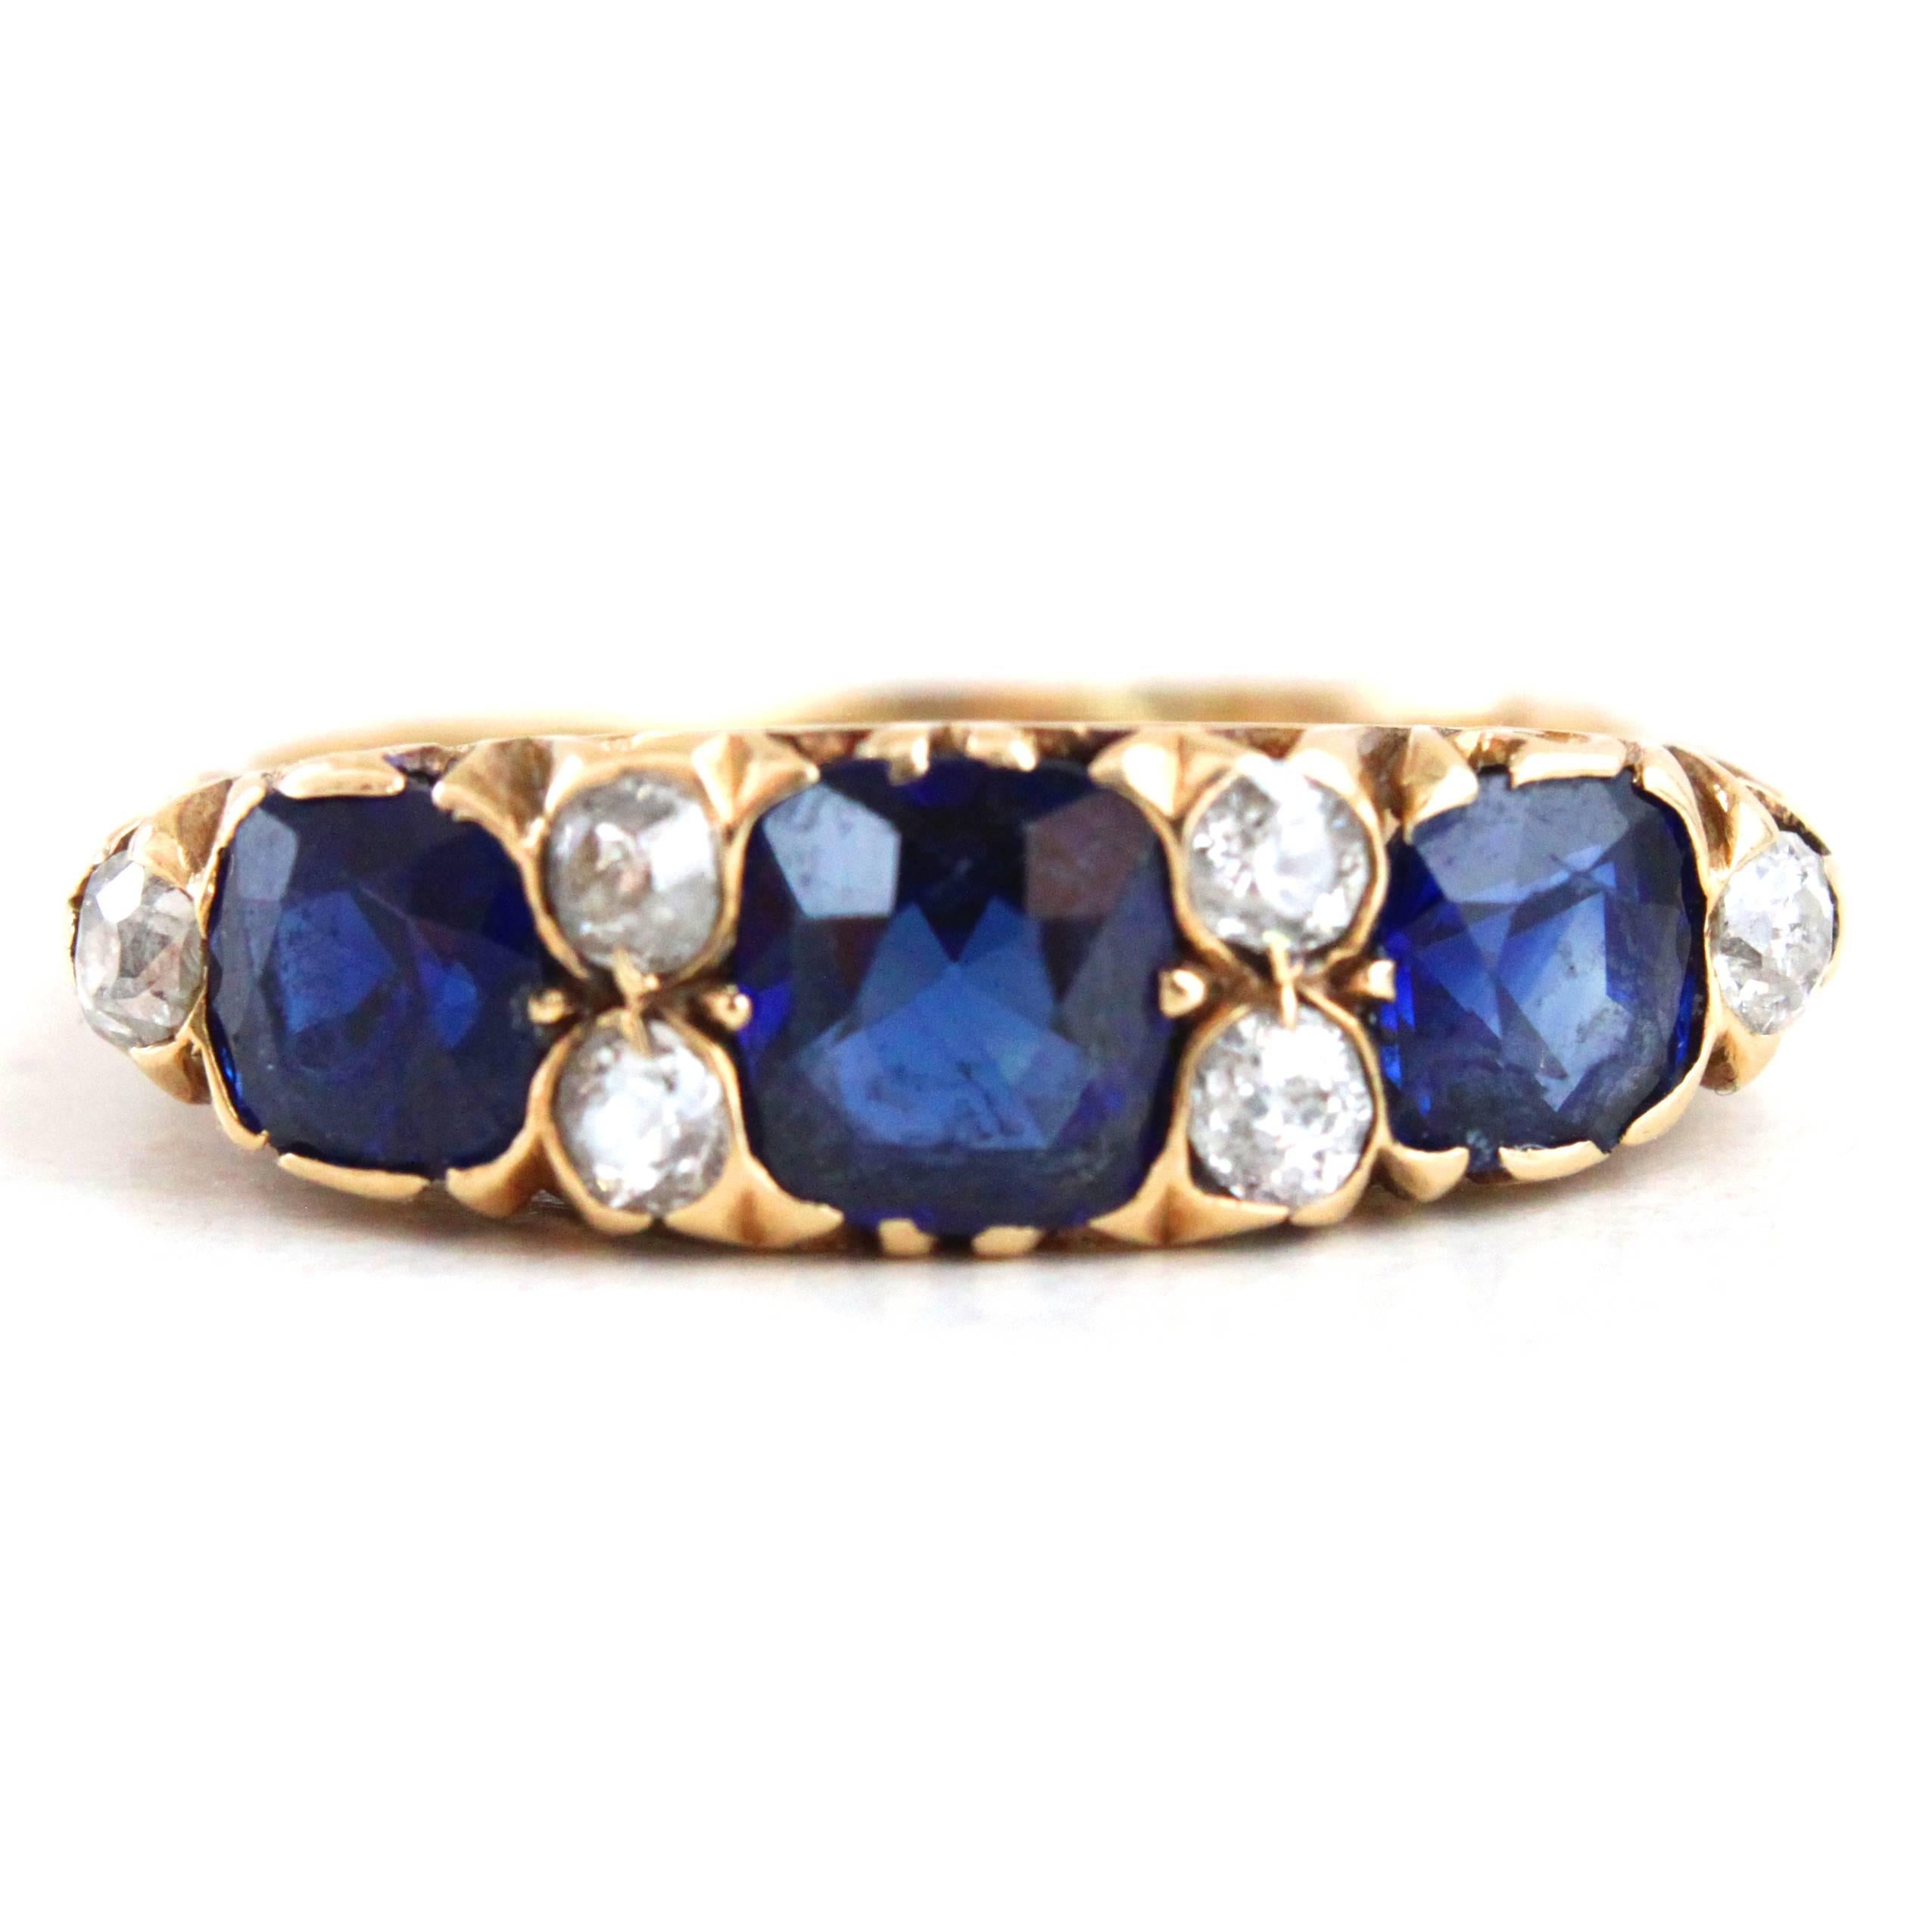 An elegant Victorian Sapphire and Diamond Ring, ca. 1890s set in 18k yellow gold with three very well saturated sapphires, surrounded by old-cut diamonds.

Hallmarked and signed.
Ring size 7.5 (can be altered).